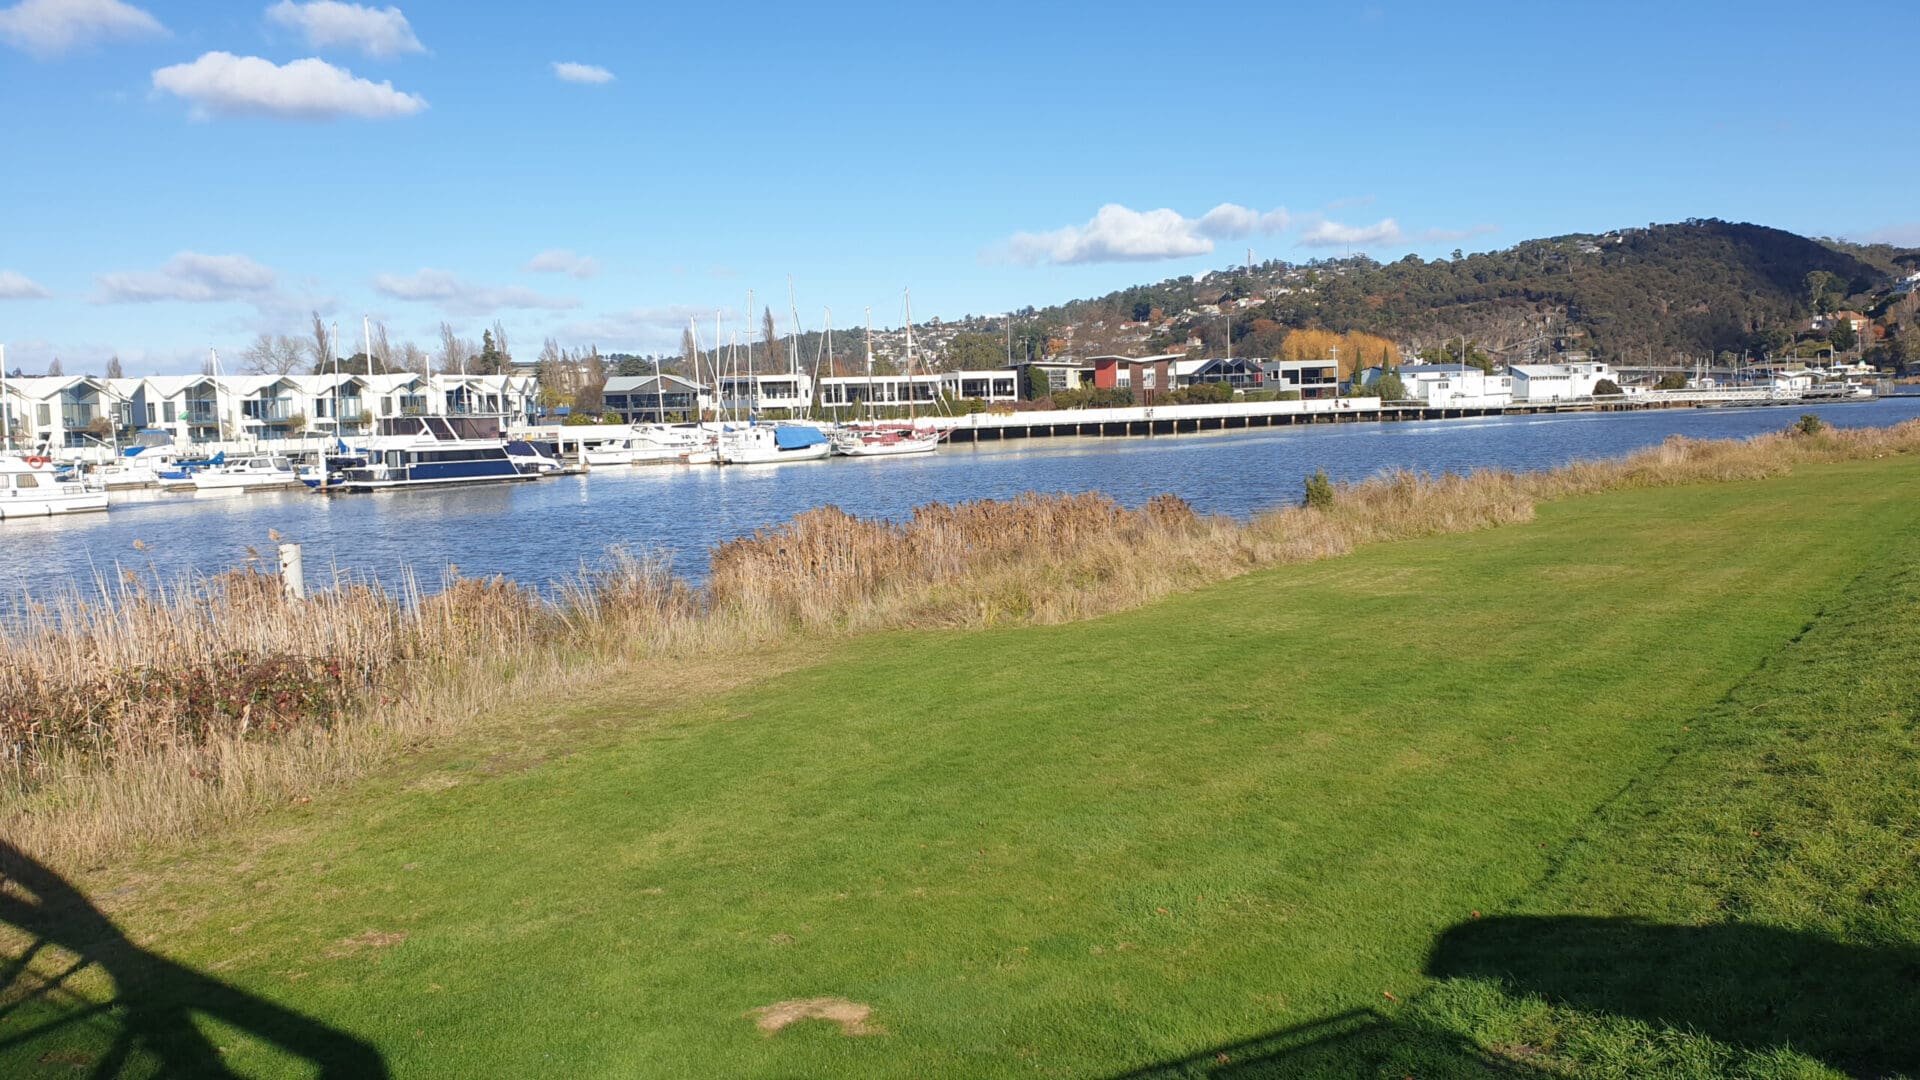 Top 10 amazing things-Launceston river Trail looking out to Tamar river